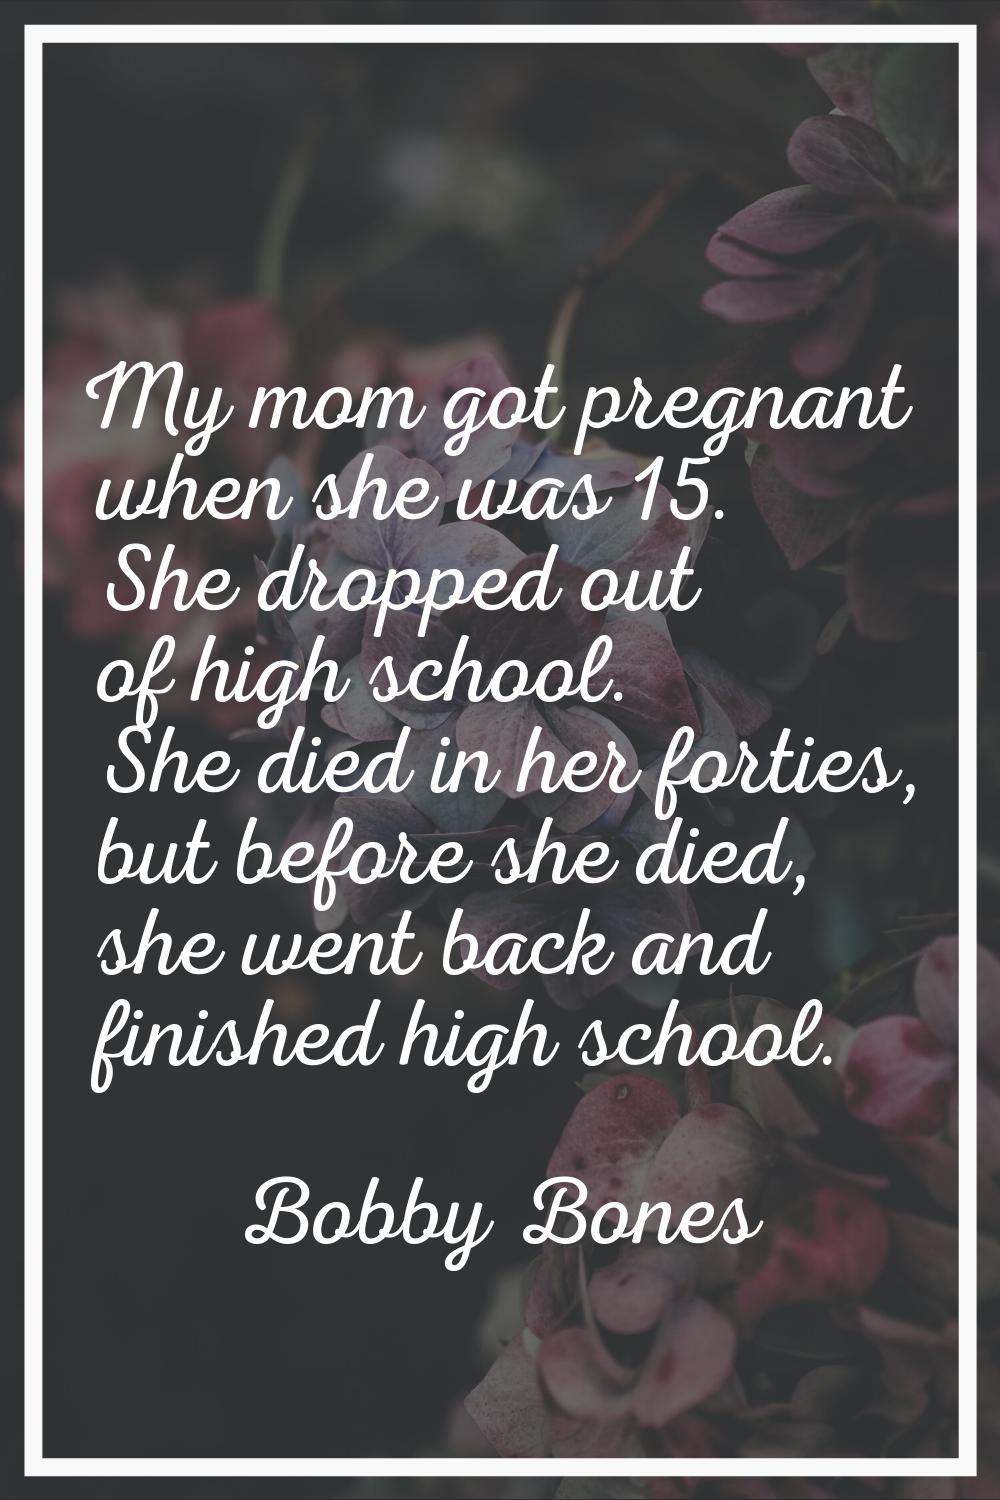 My mom got pregnant when she was 15. She dropped out of high school. She died in her forties, but b